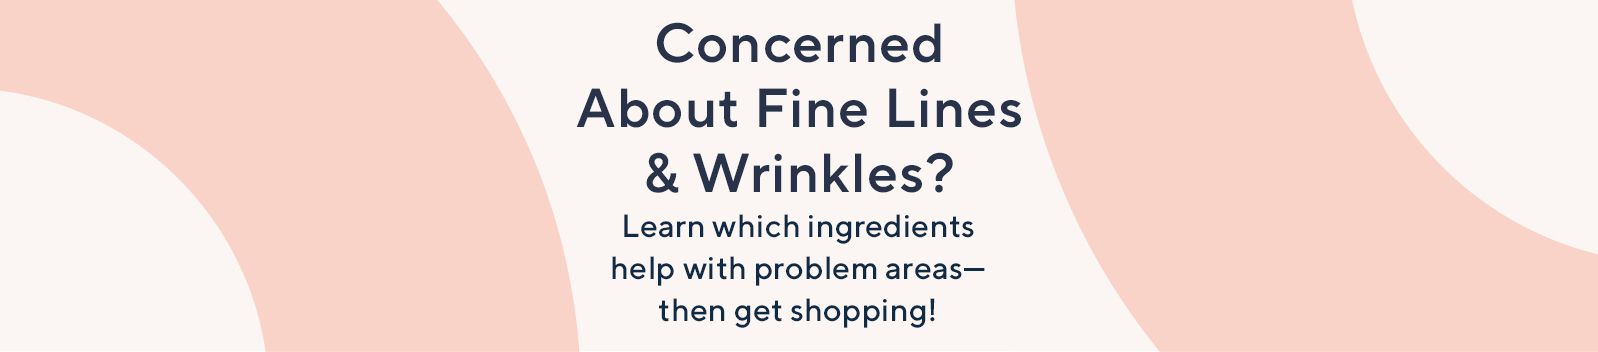 Concerned About Fine Lines & Wrinkles?  Learn which ingredients help with problem areas—then get shopping!